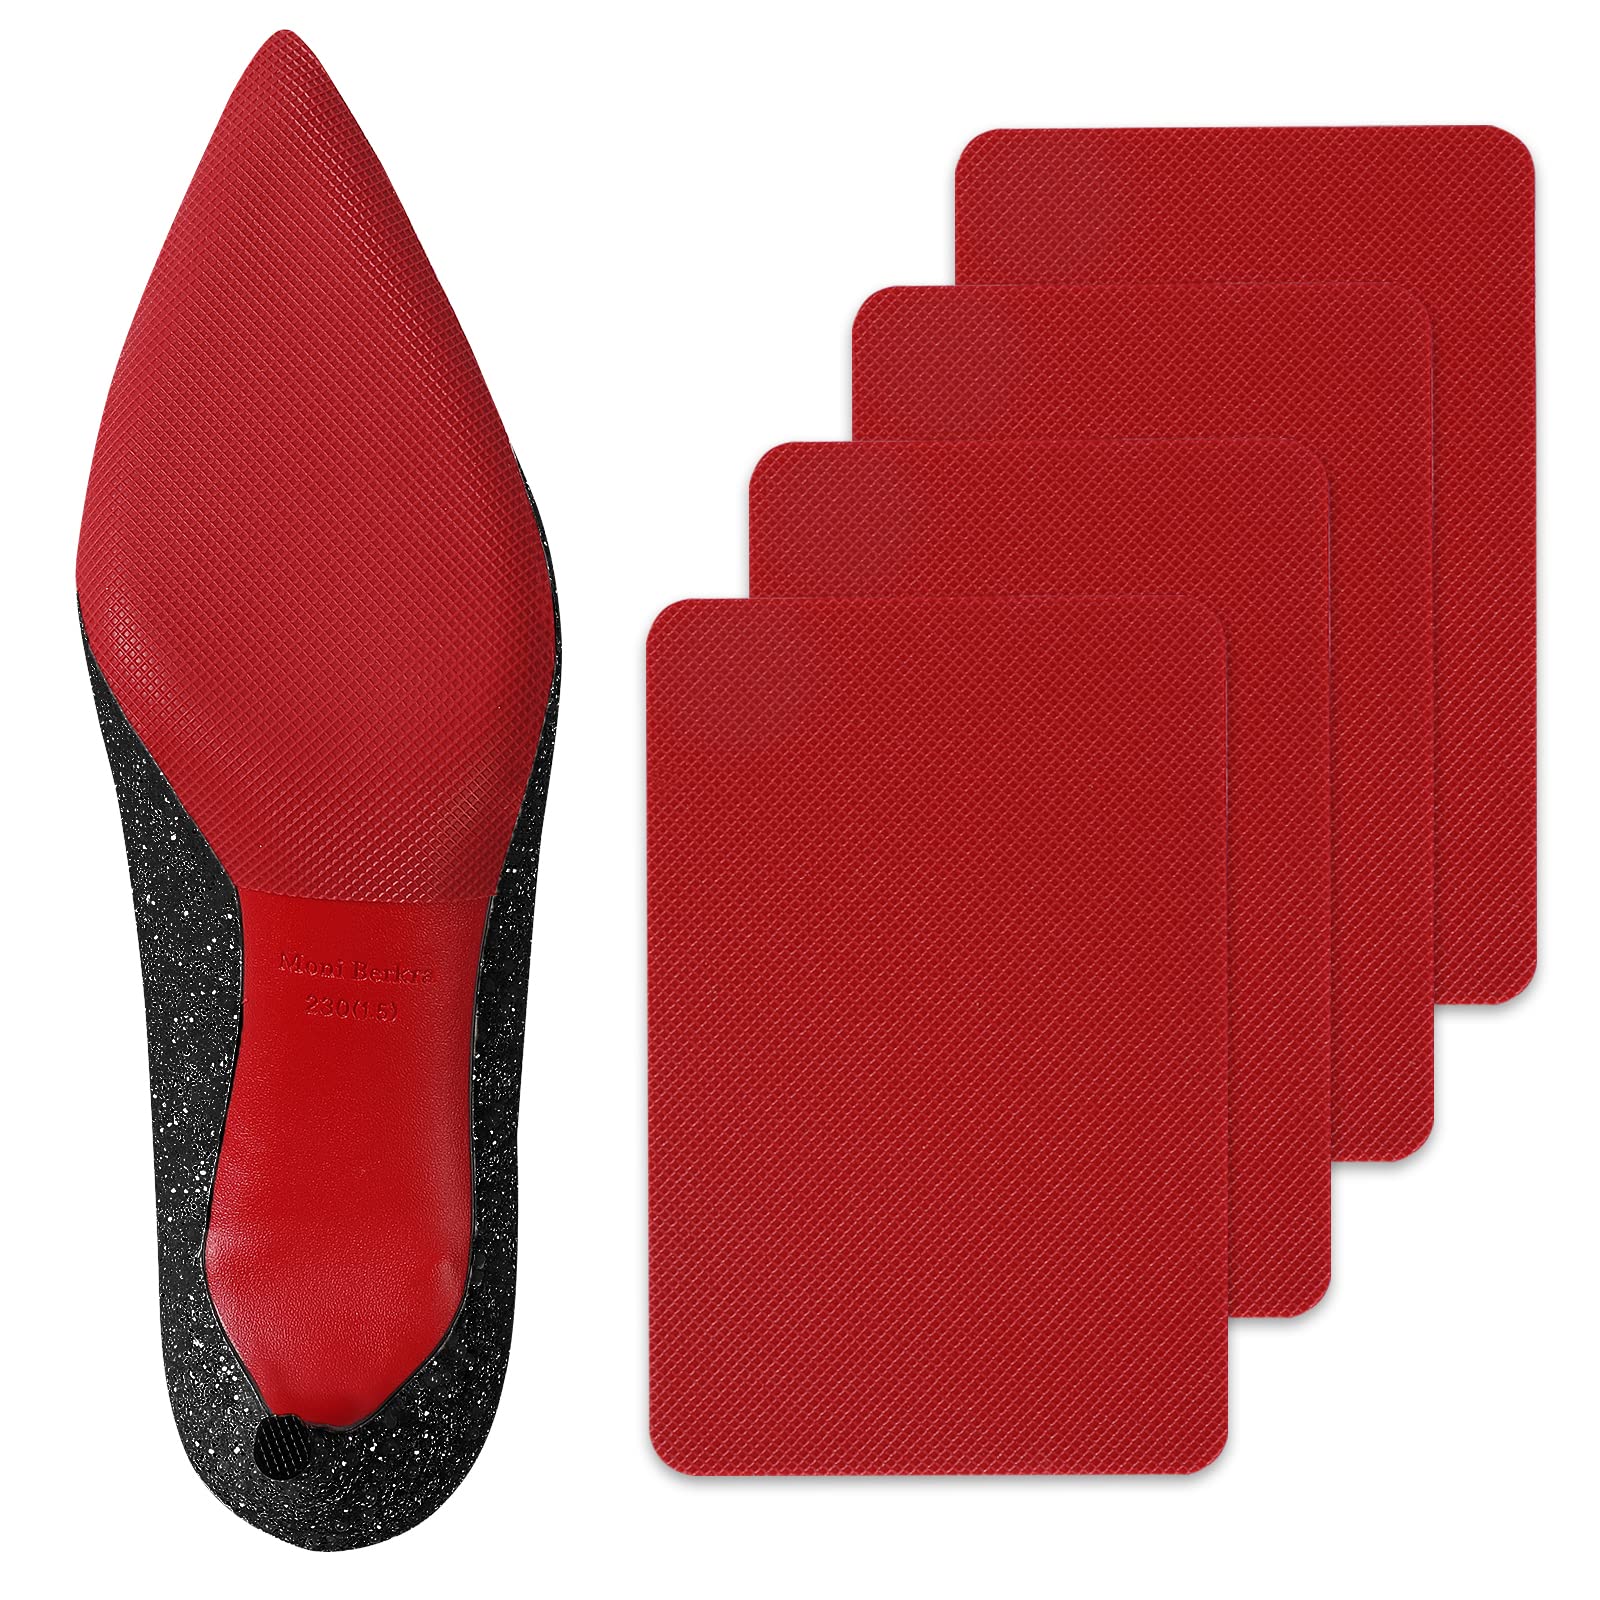  Red Shoe Sole Protector for High Heels, Red Bottom Protectors,  Shoe Grips on Bottom of Shoes,No Slip Shoe Pads, Sole Sticker (2 Pairs Red  Sole Protector + 1 Pair Beige Heel